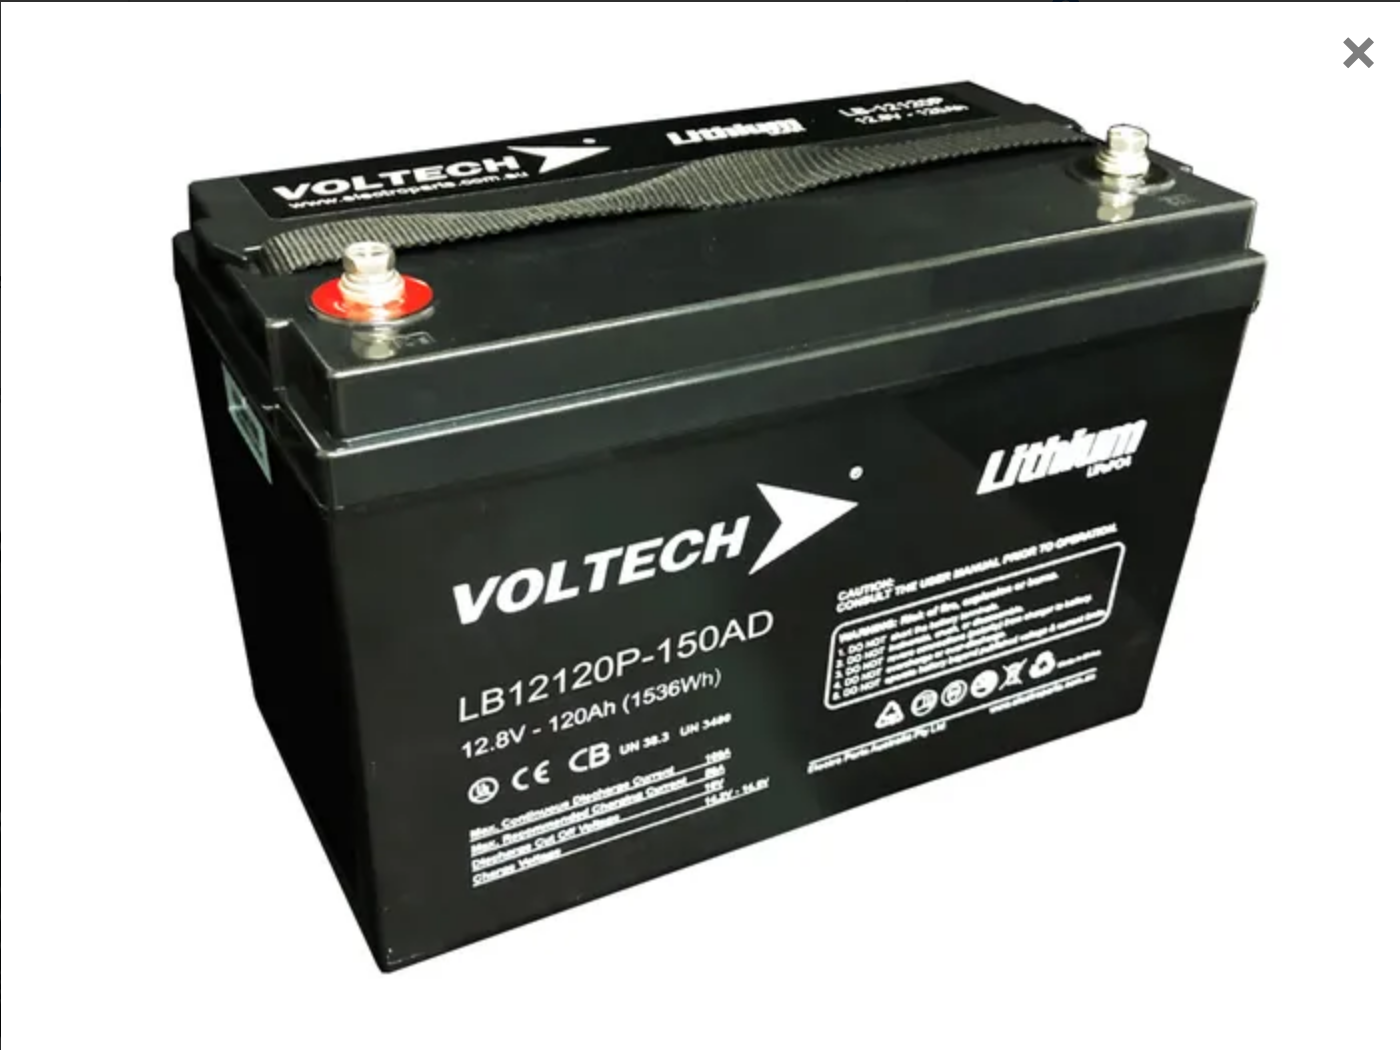 LB12120P-150AD - Lithium Battery 12.8V-120Ah with 150Amp Discharge